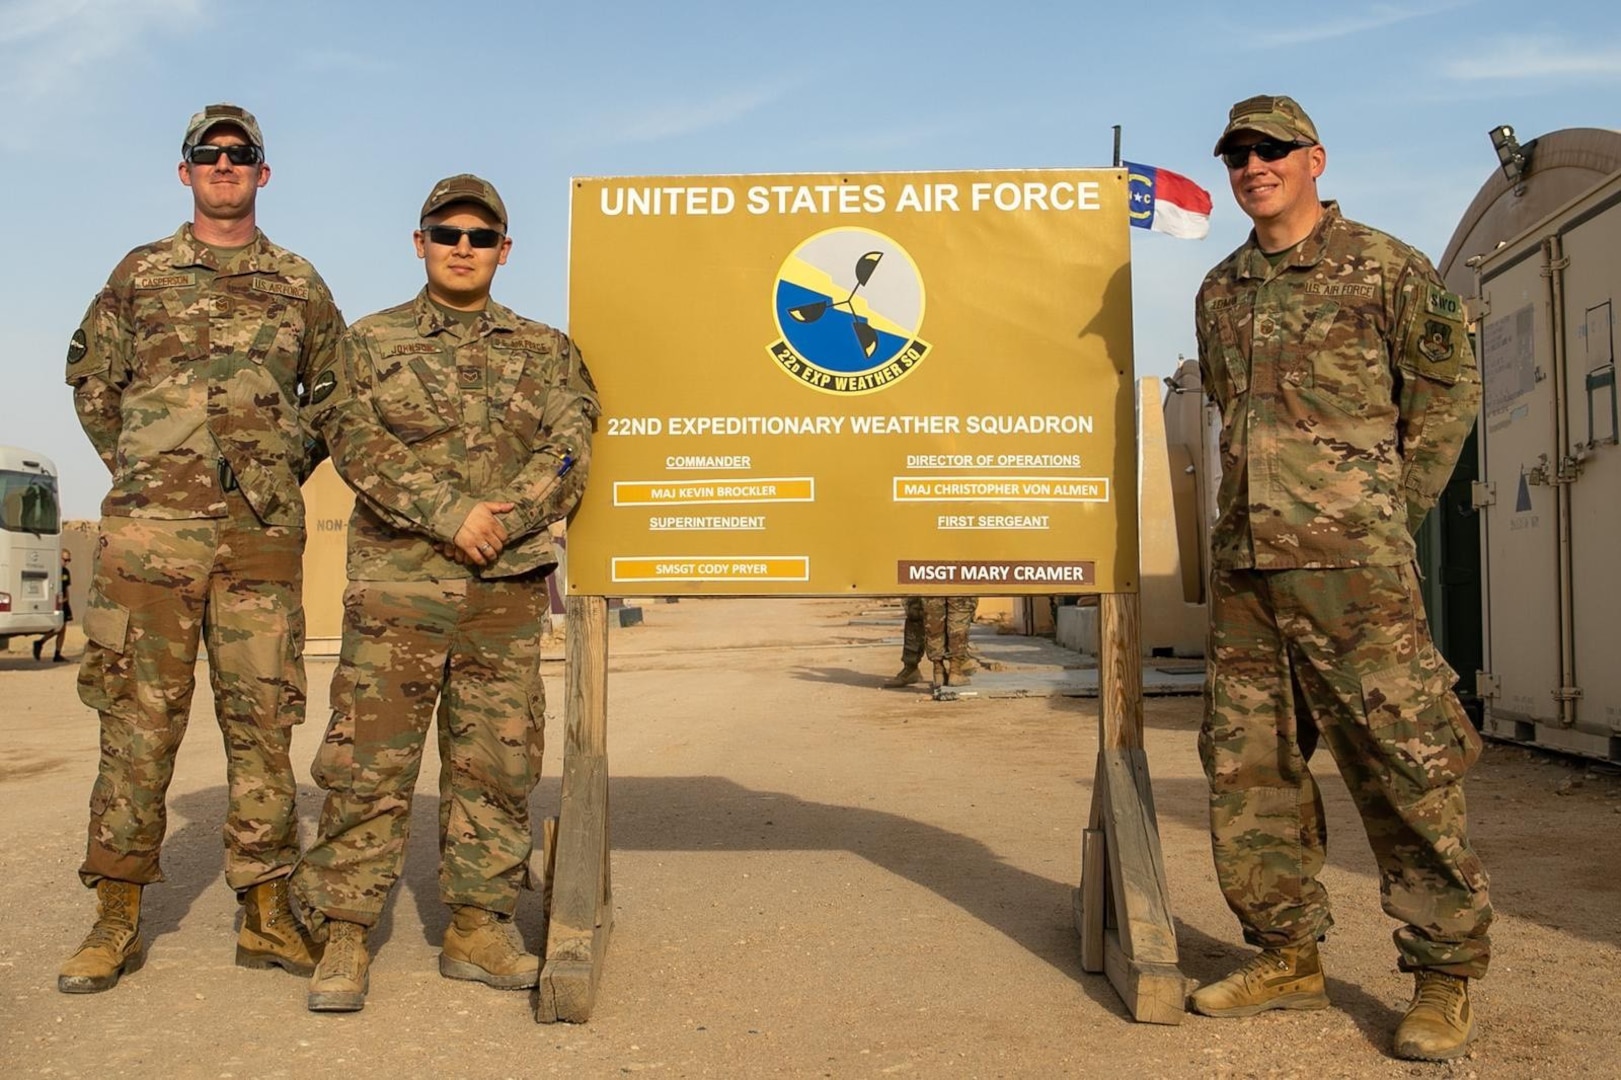 U.S. Airmen from the North Carolina Air National Guard’s 156th Weather Flight, 145th Air Wing, in front of the 22nd Expeditionary Weather Squadron sign while deployed in the U.S. Army Central Command area of responsibility, March 19, 2020. The Airmen predicted a severe sandstorm in late February supporting the 30th Armored Brigade Combat Team.